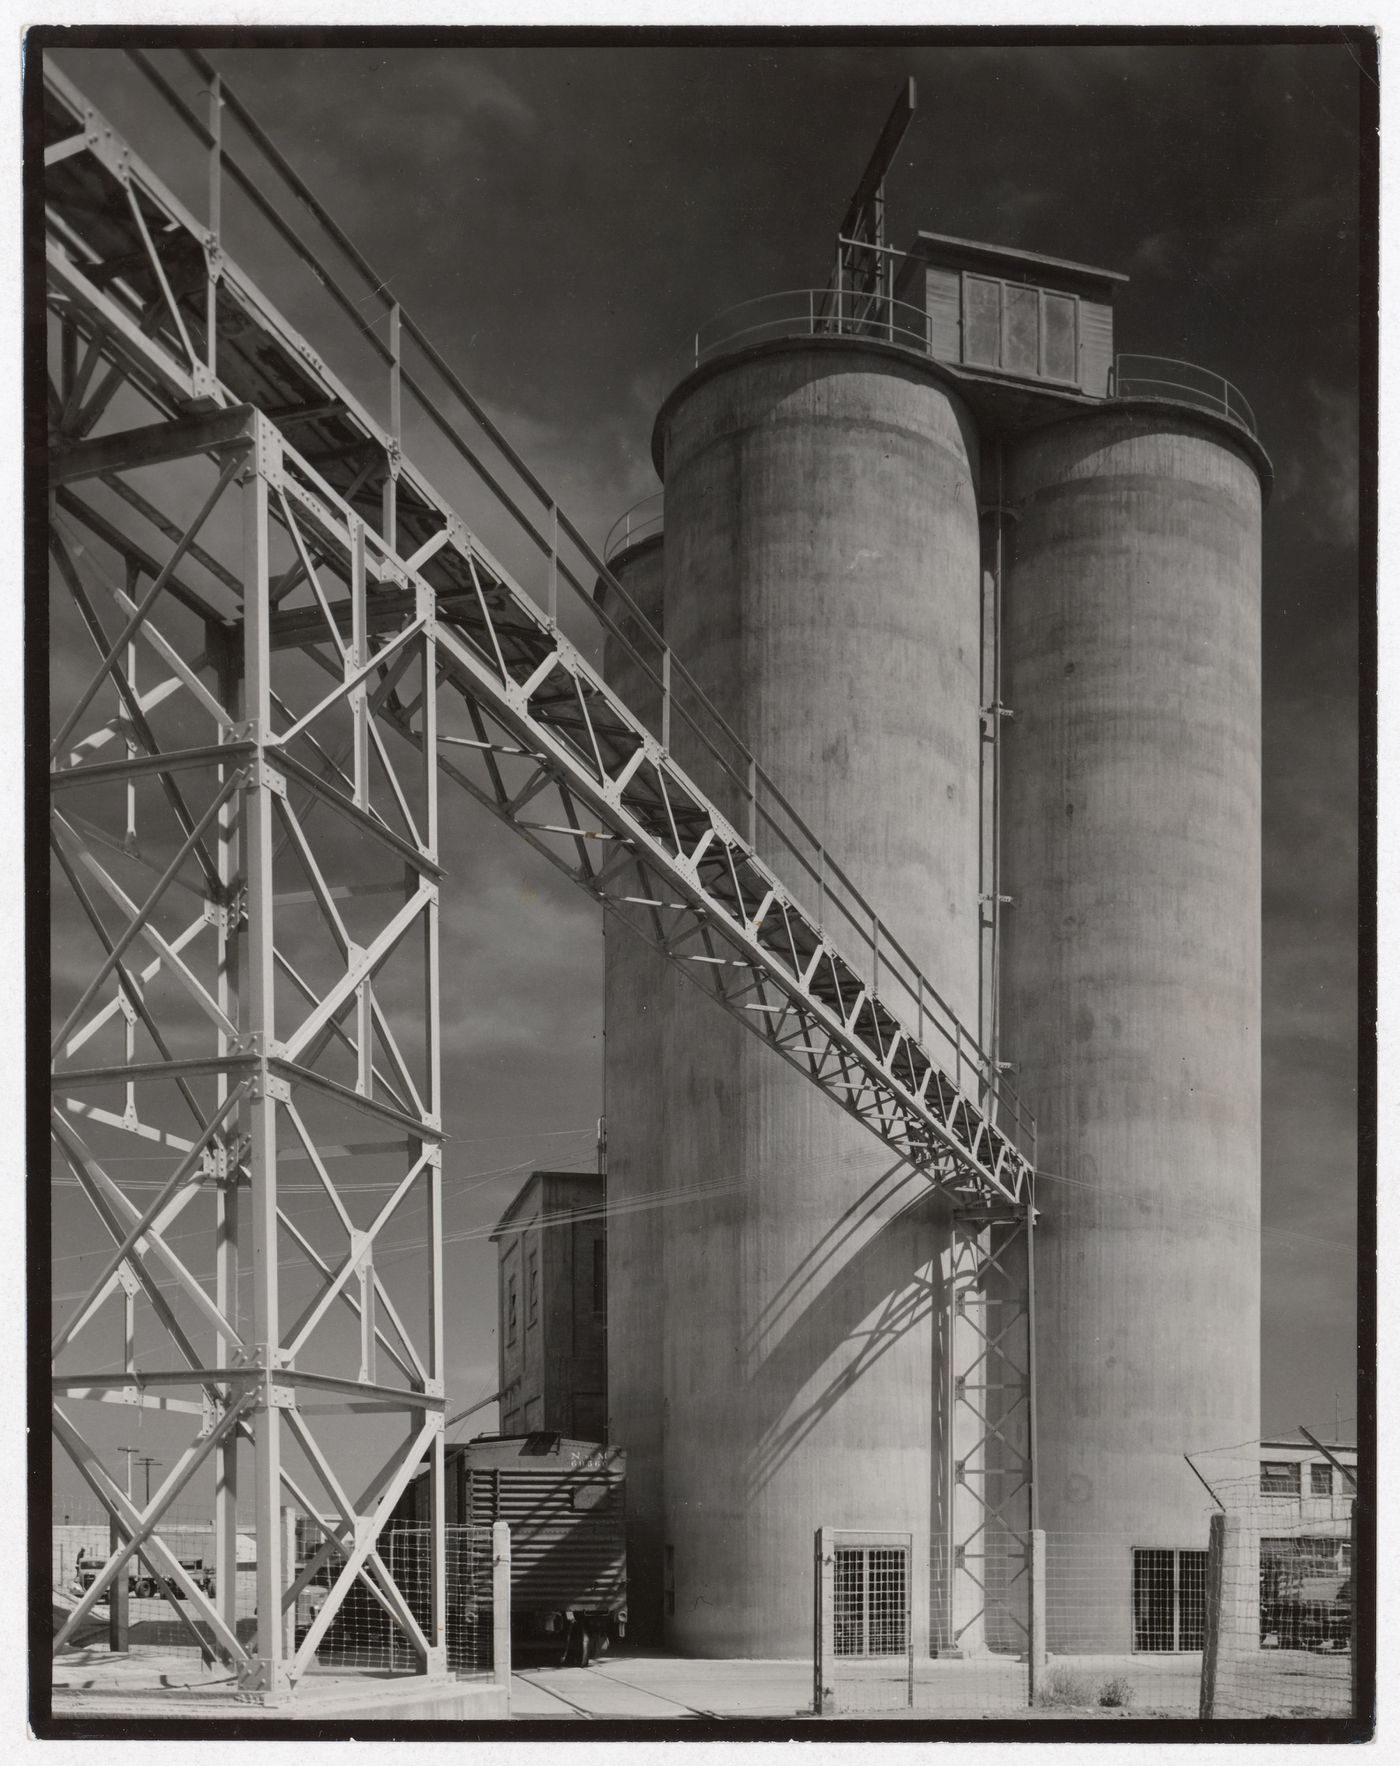 View of the Cemento Tolteca plant, Mexico, D.F.